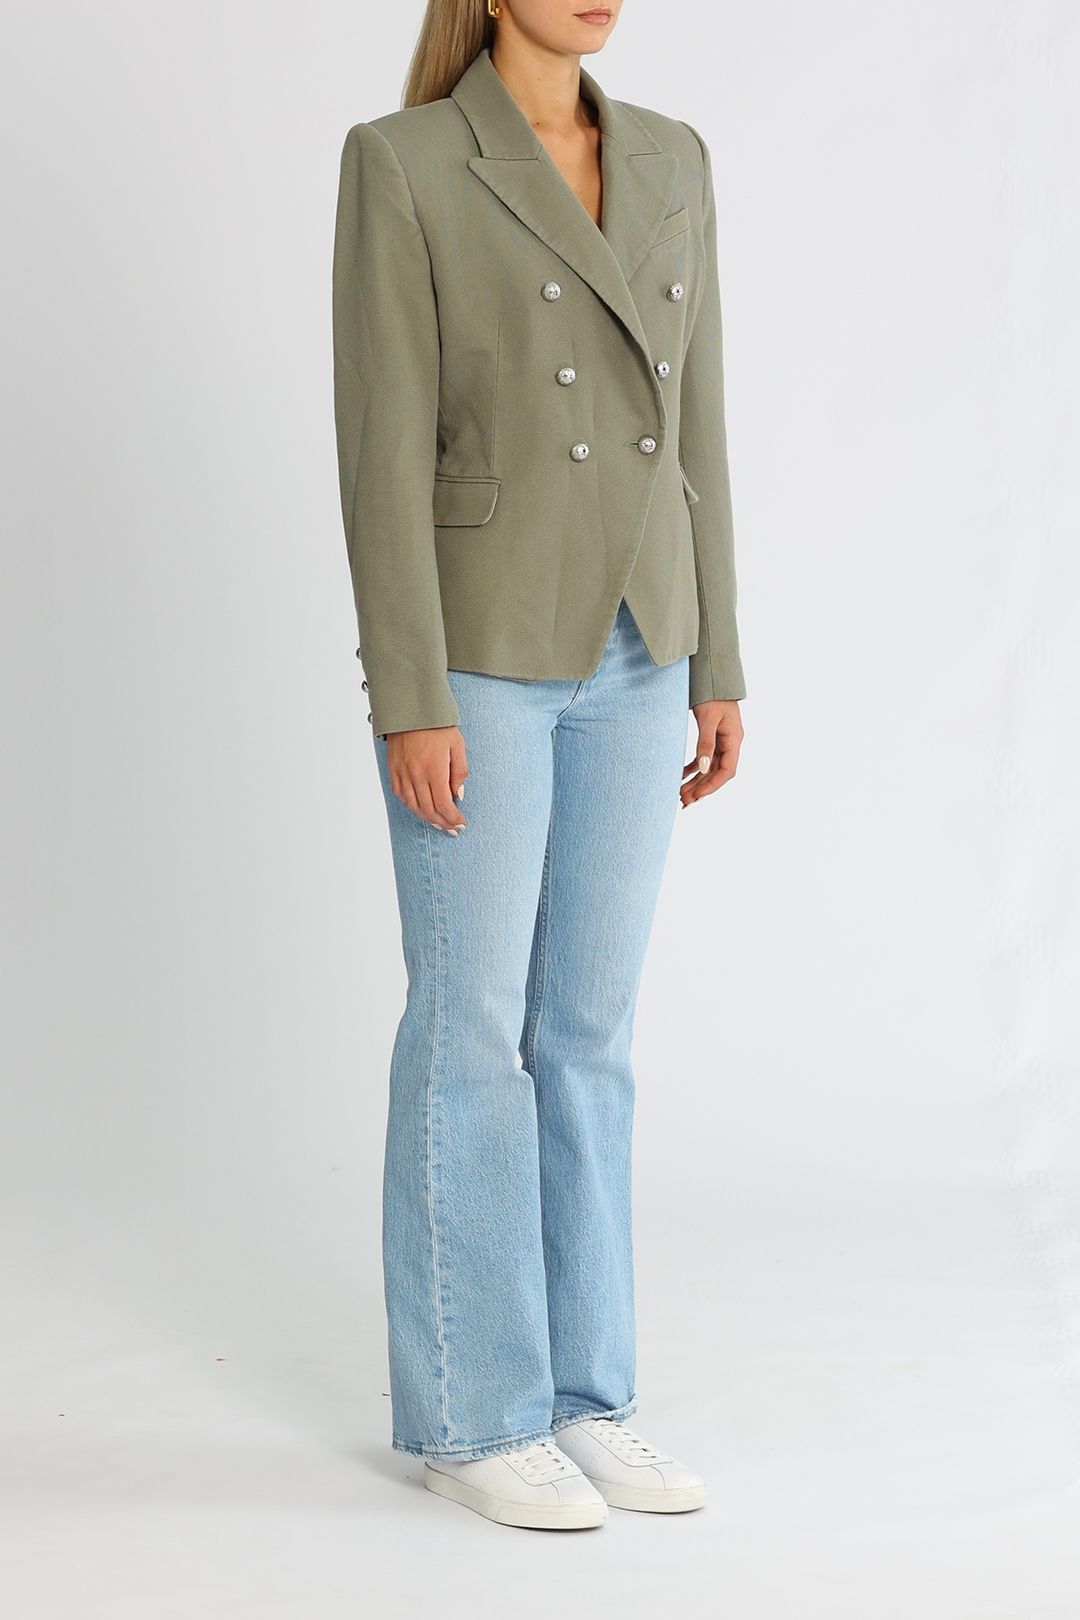 Camilla and Marc Dimmer Blazer Long Sleeves